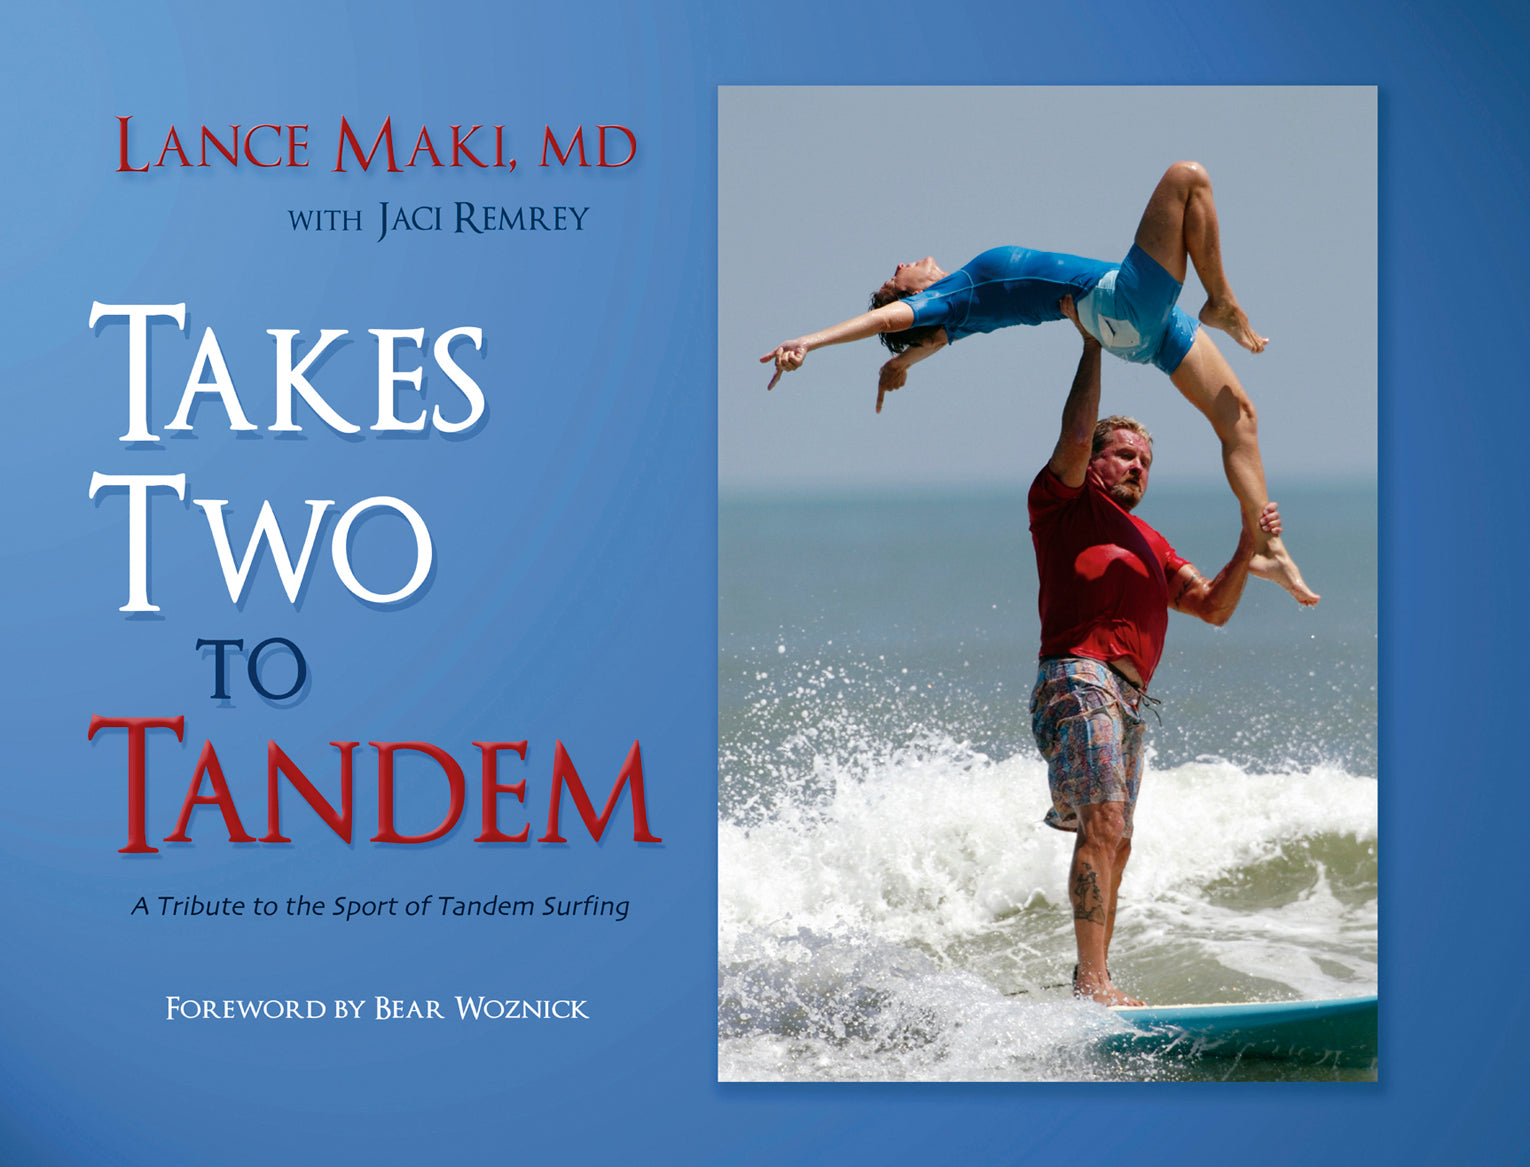 Takes Two to Tandem, Lance Maki, MD - Blue Note Publications, Inc